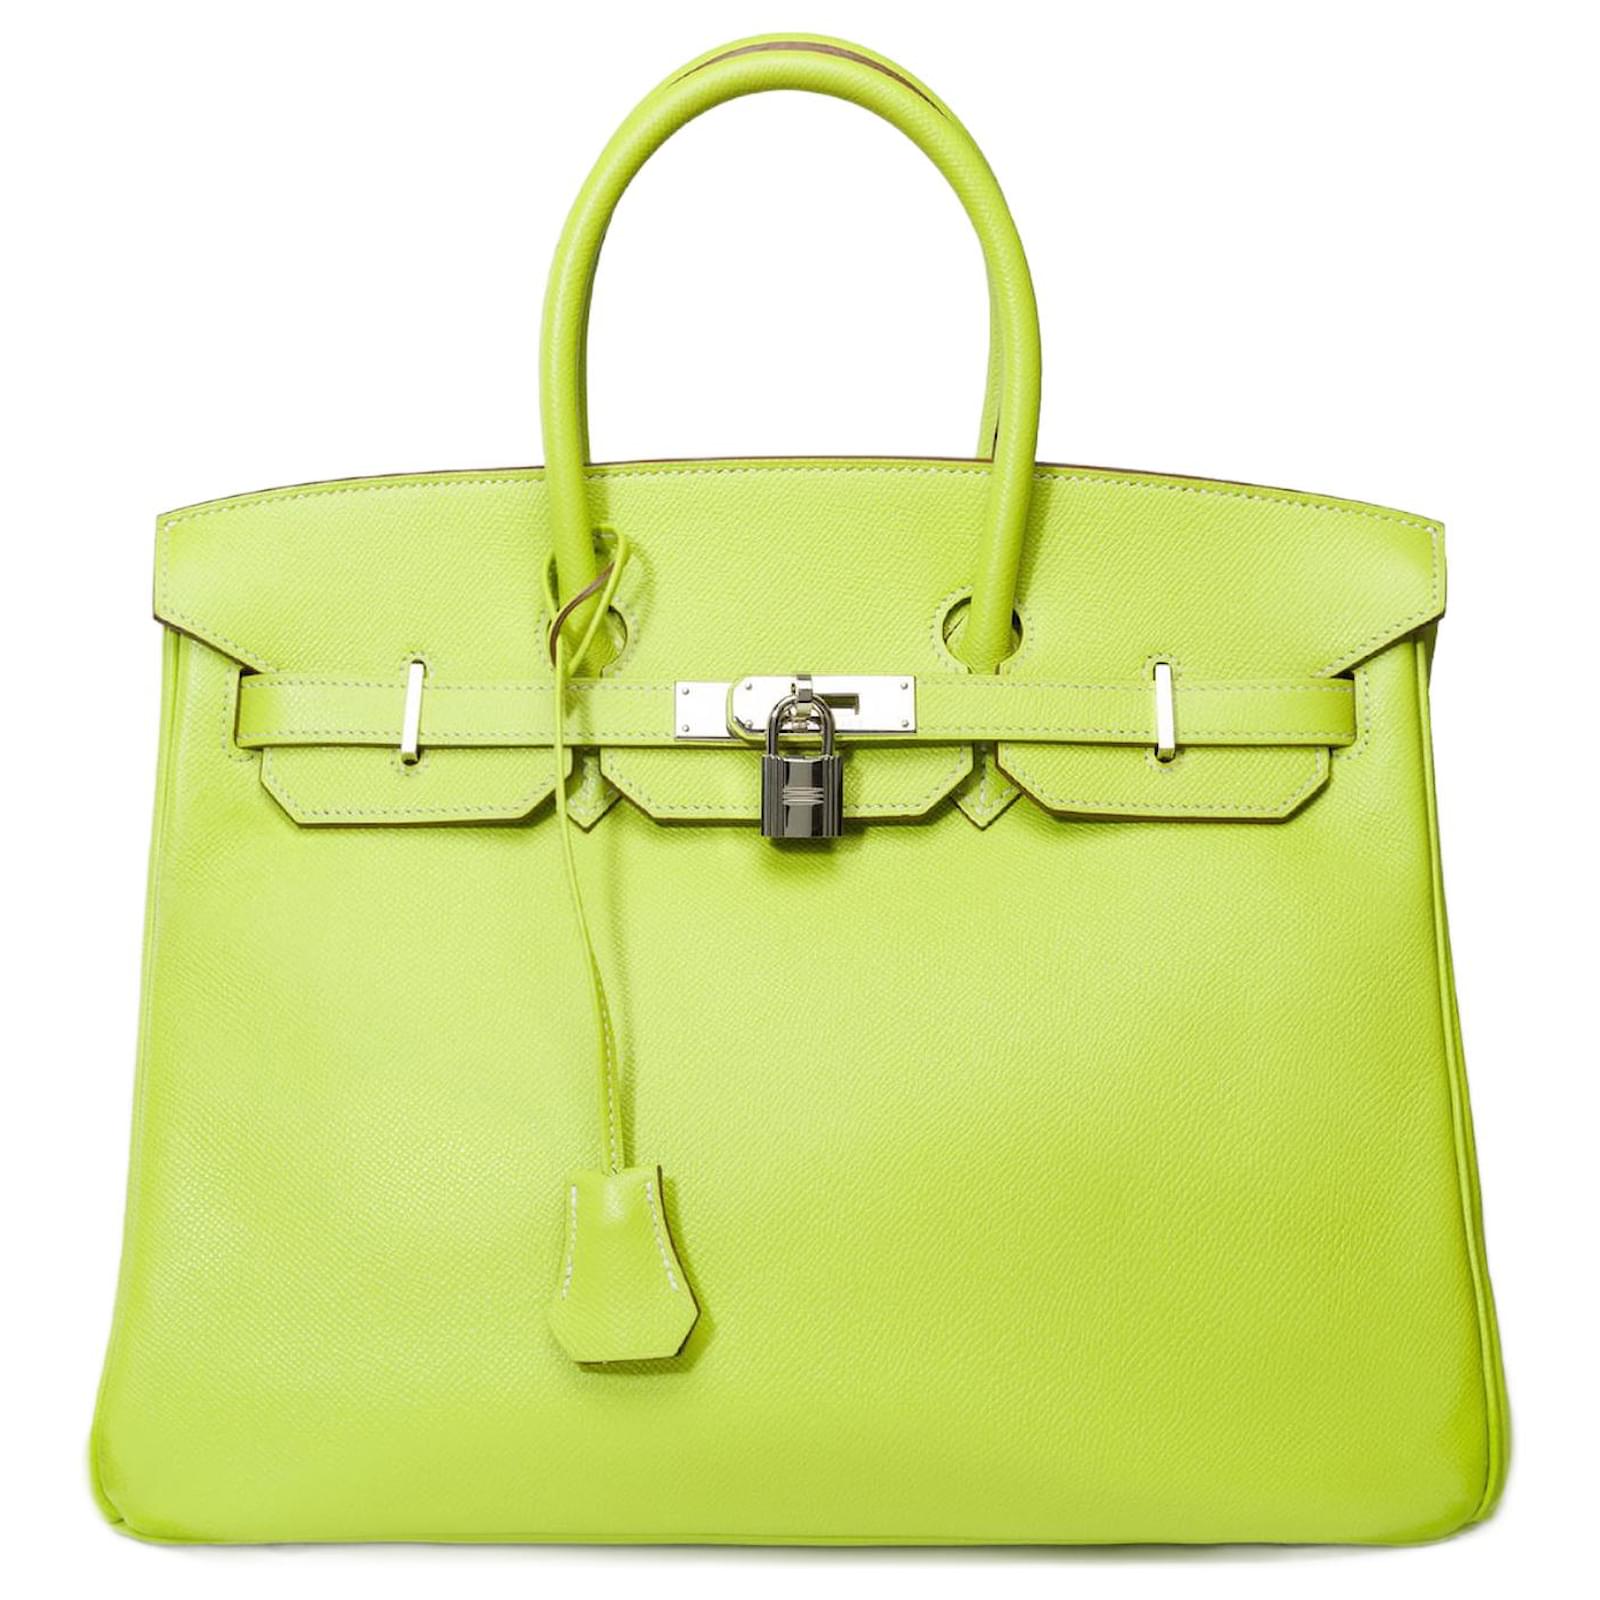 Image of Kiwi leather with olive green interior Kelly bag, Hermes, 2011